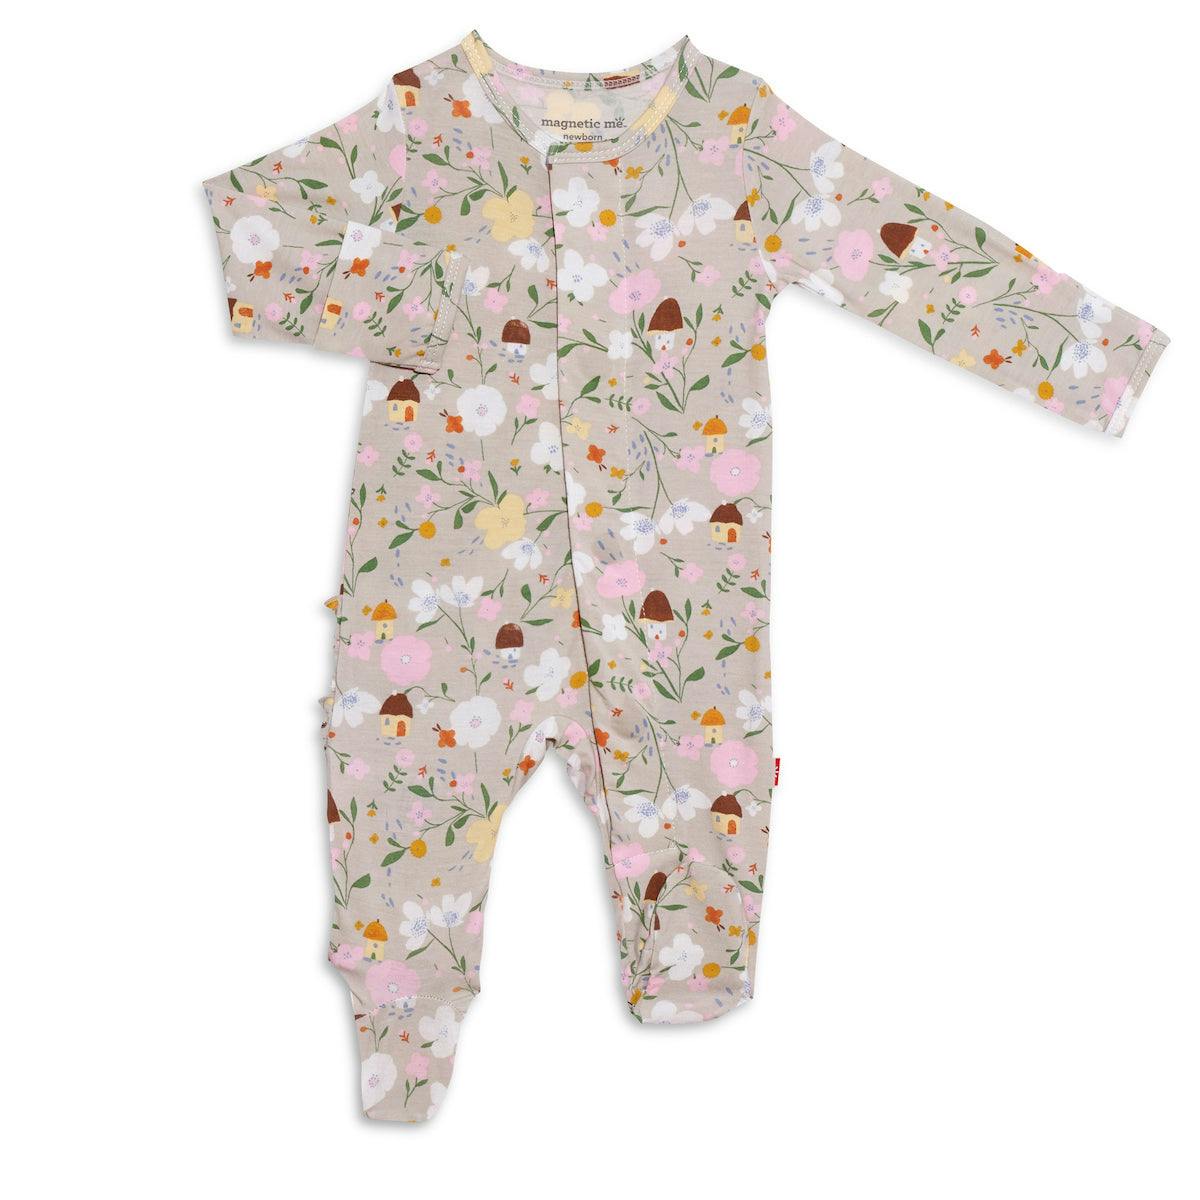 Magnetic Me Modal Ruffle Footie Portabella Posies · 9/12 months